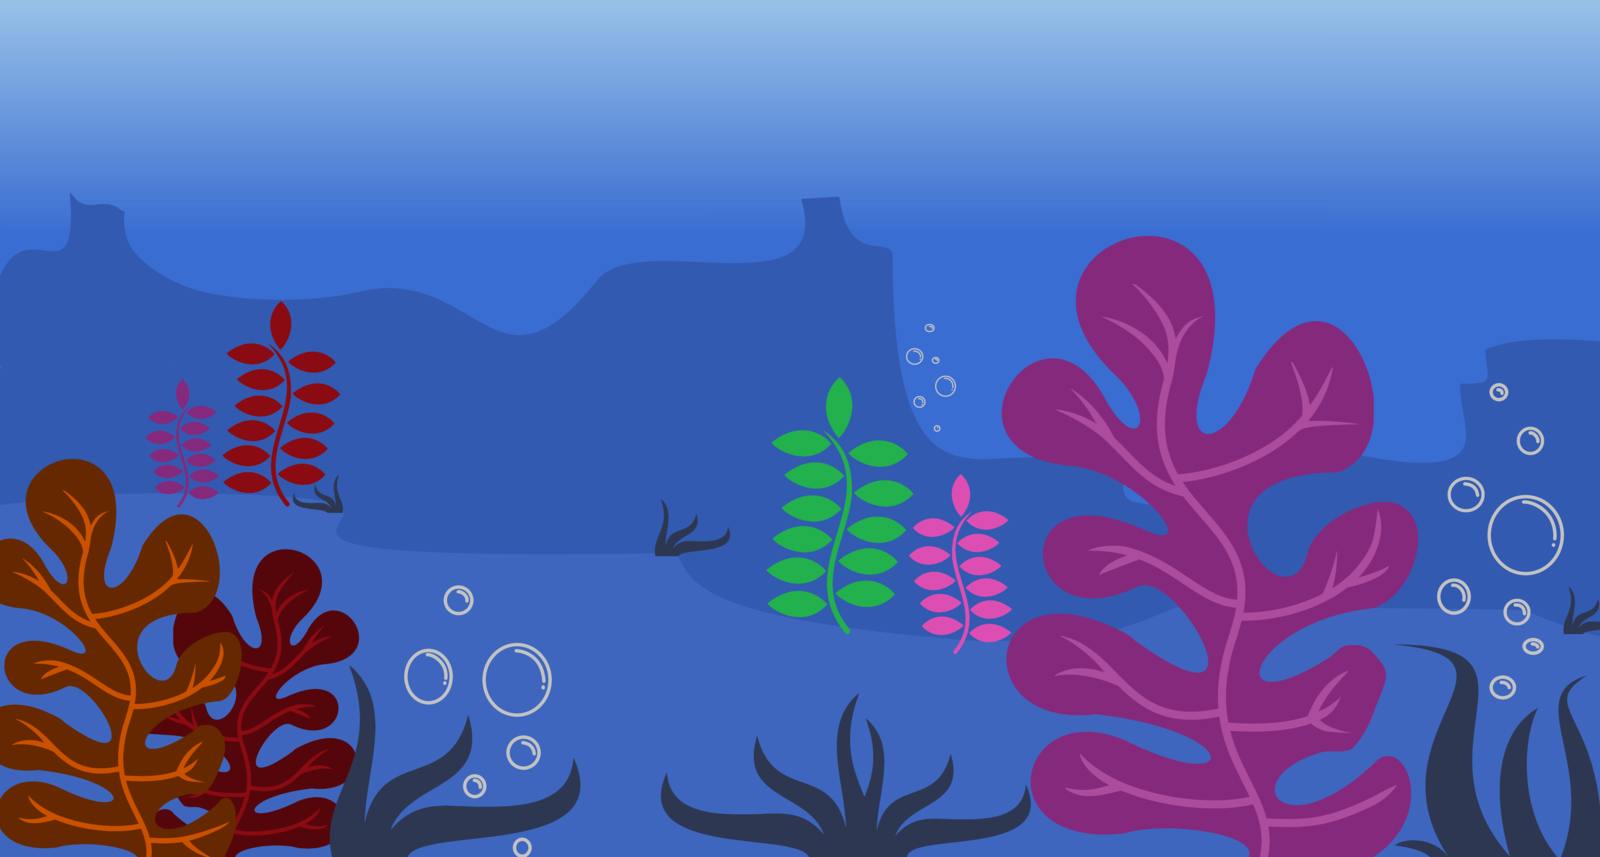 Seabed Ocean Clip art - Ocean Background Cliparts png download - 1600